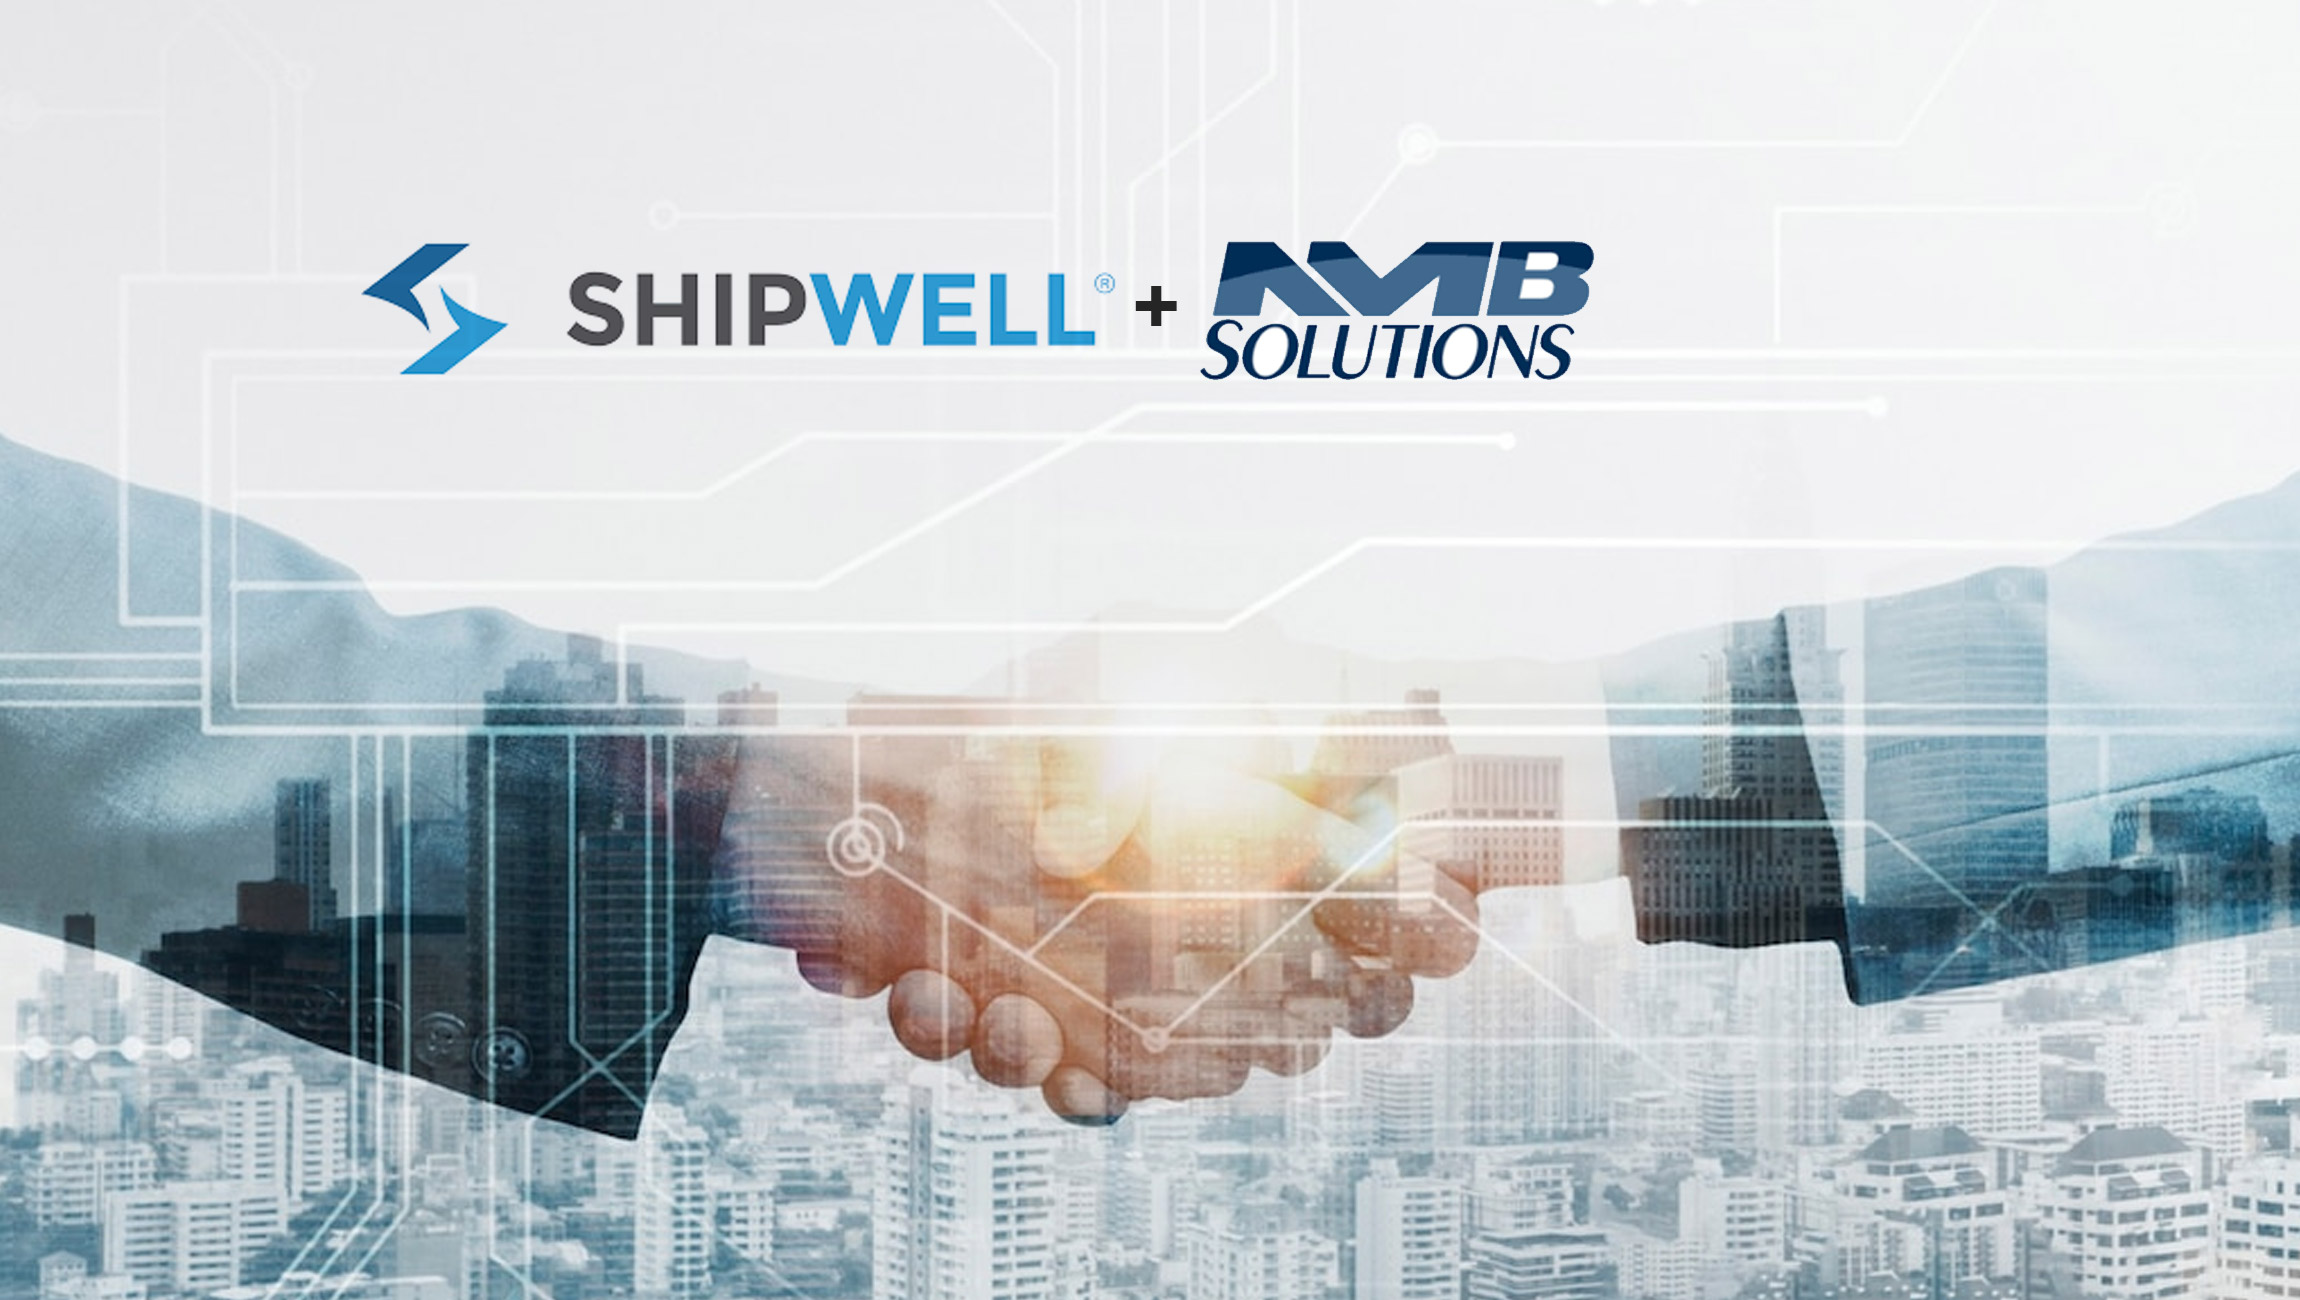 Shipwell Partners with NMB Solutions Inc. to Provide Certified, Robust TMS Solution for the Microsoft Dynamics 365 Community